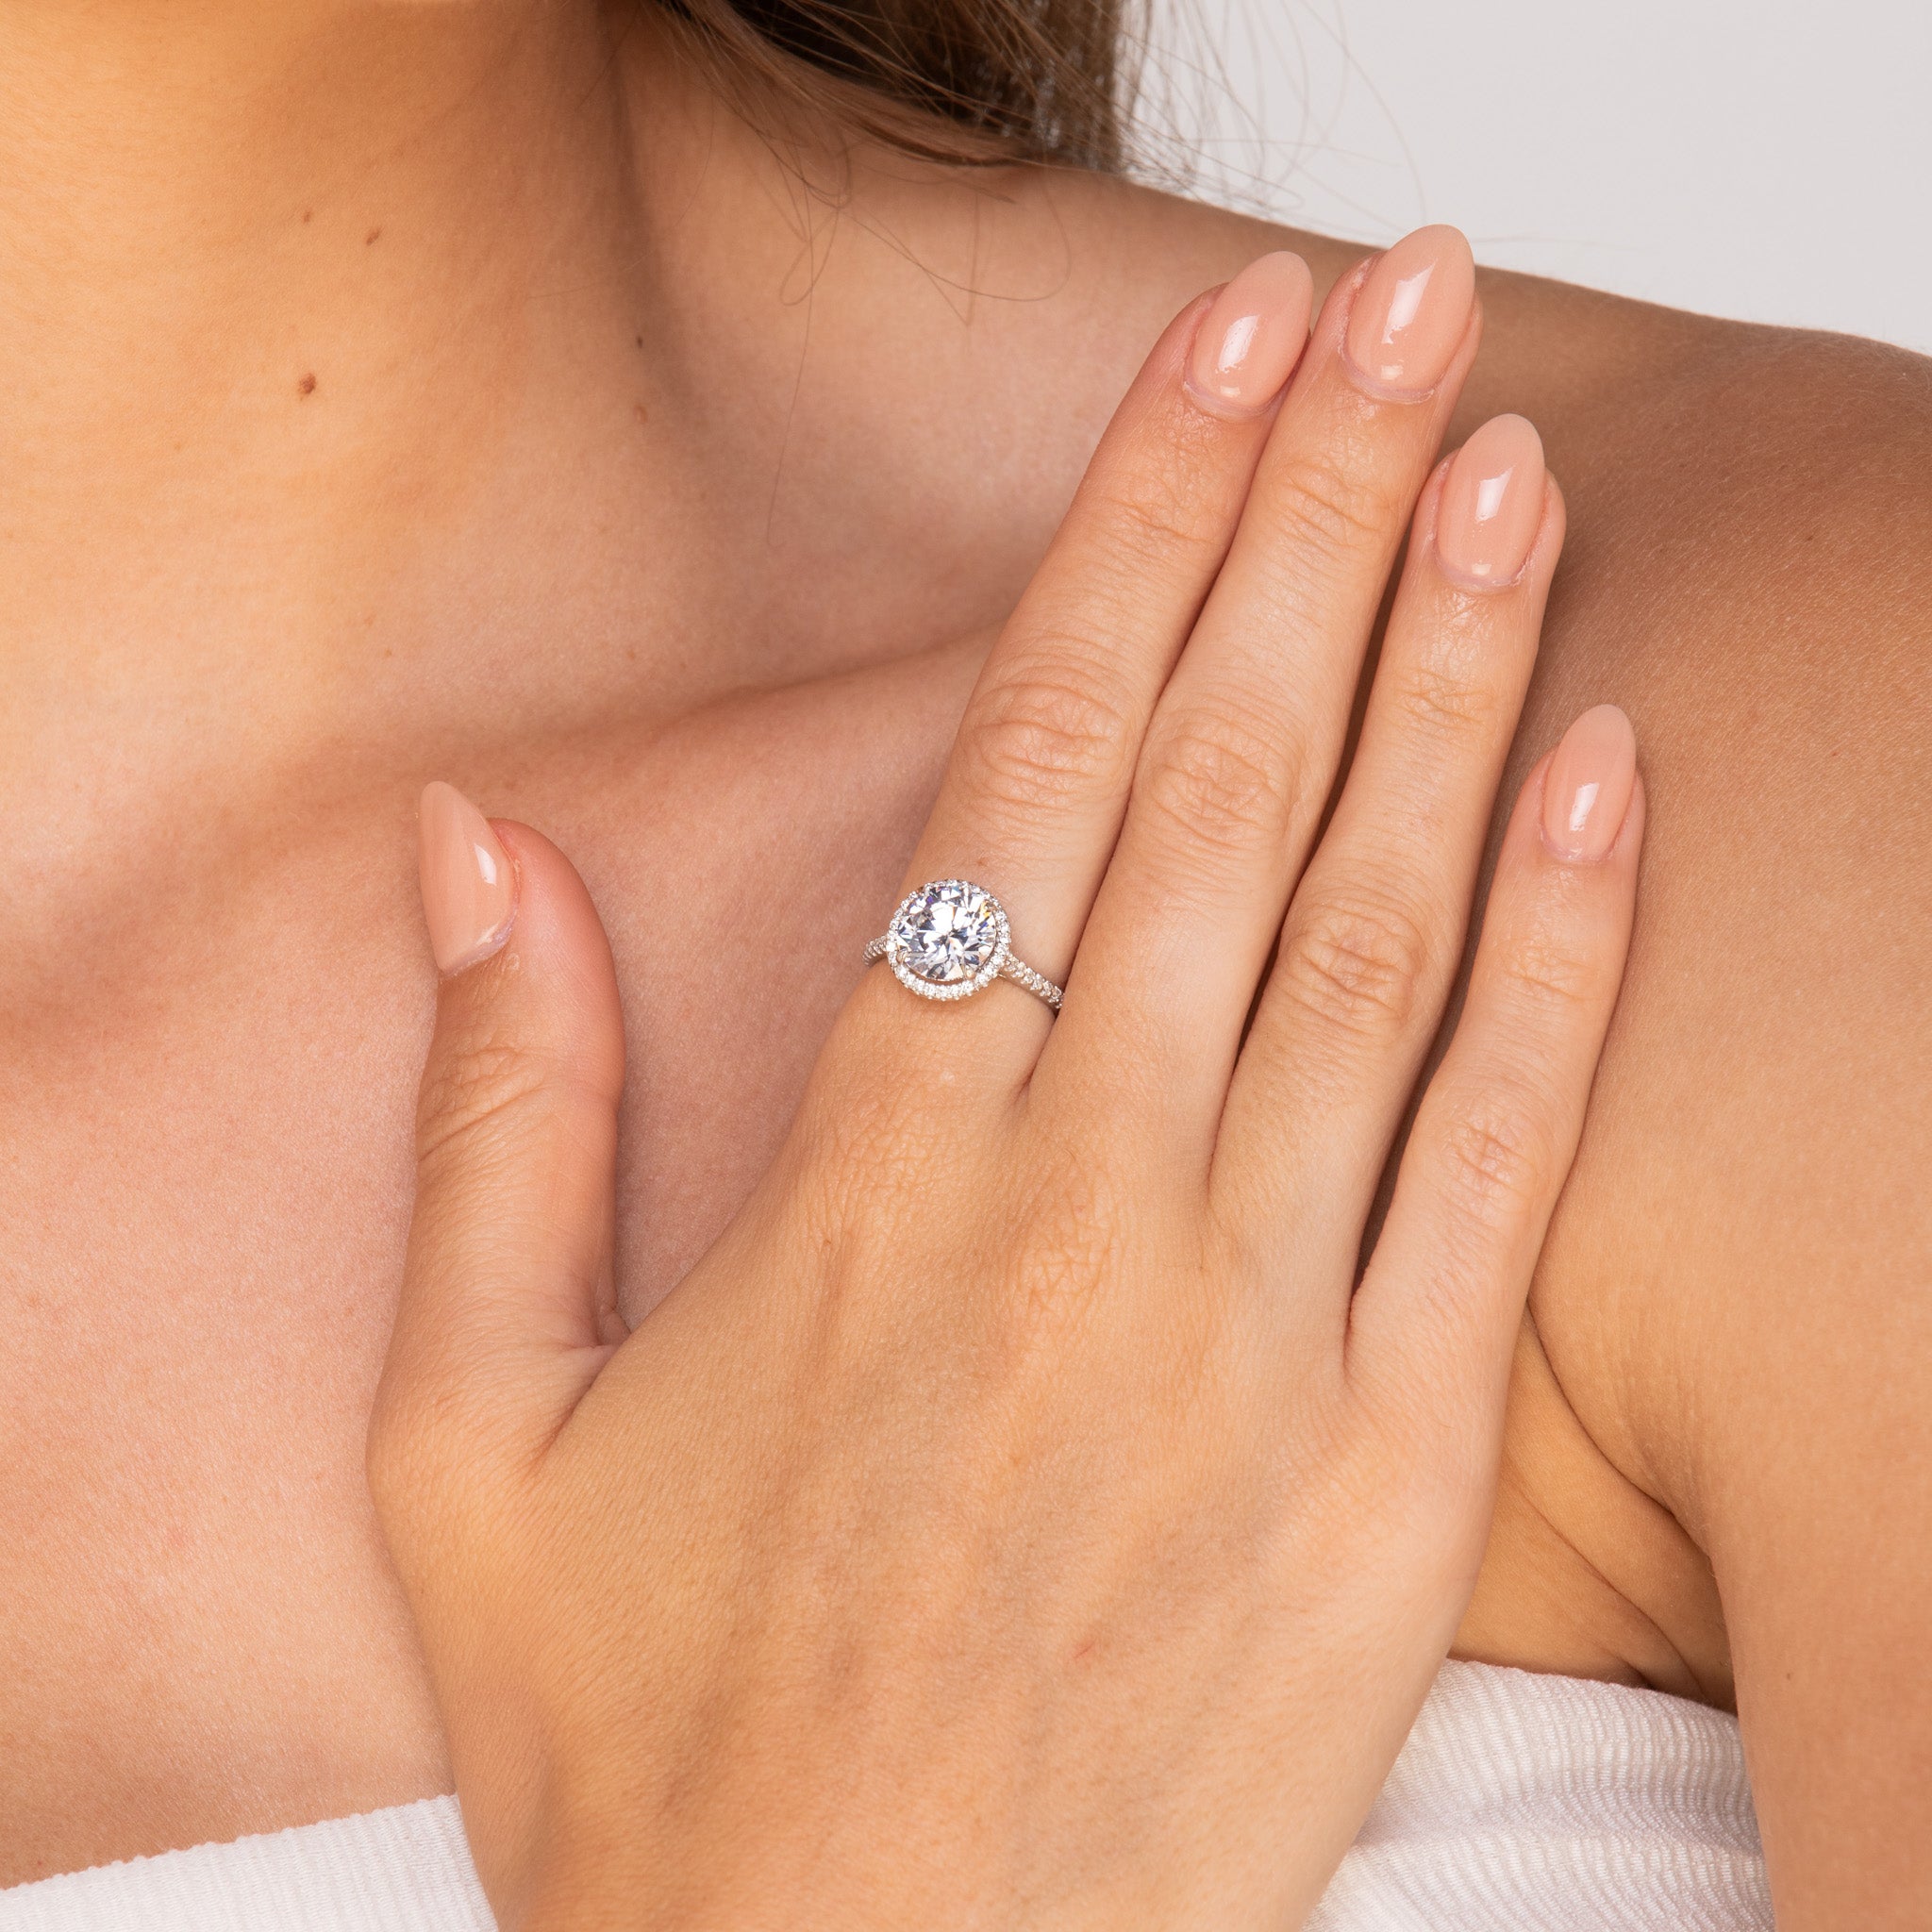 The Eliza Round Sapphire Engagement Ring